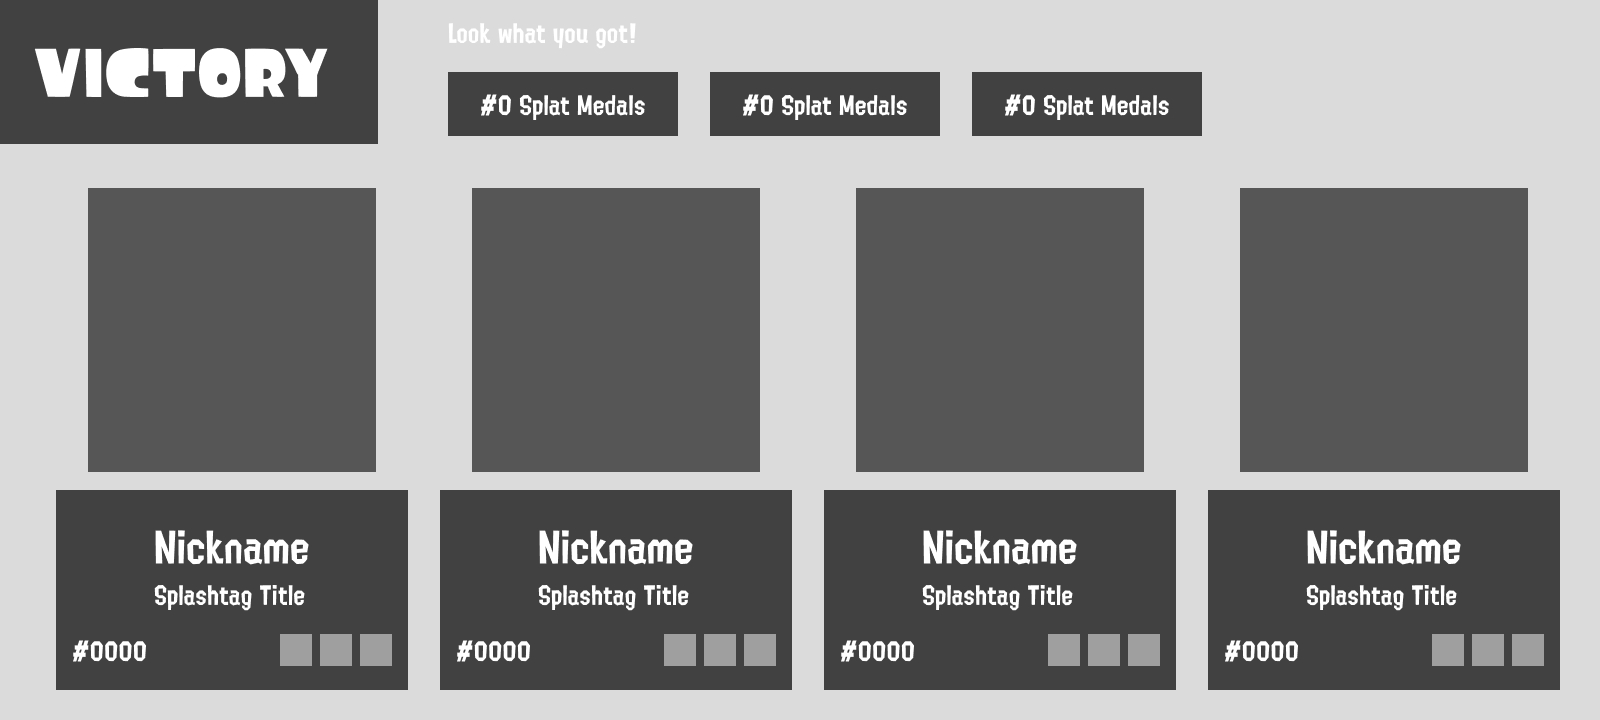 wireframe-greyscale_5.0-victory-screen